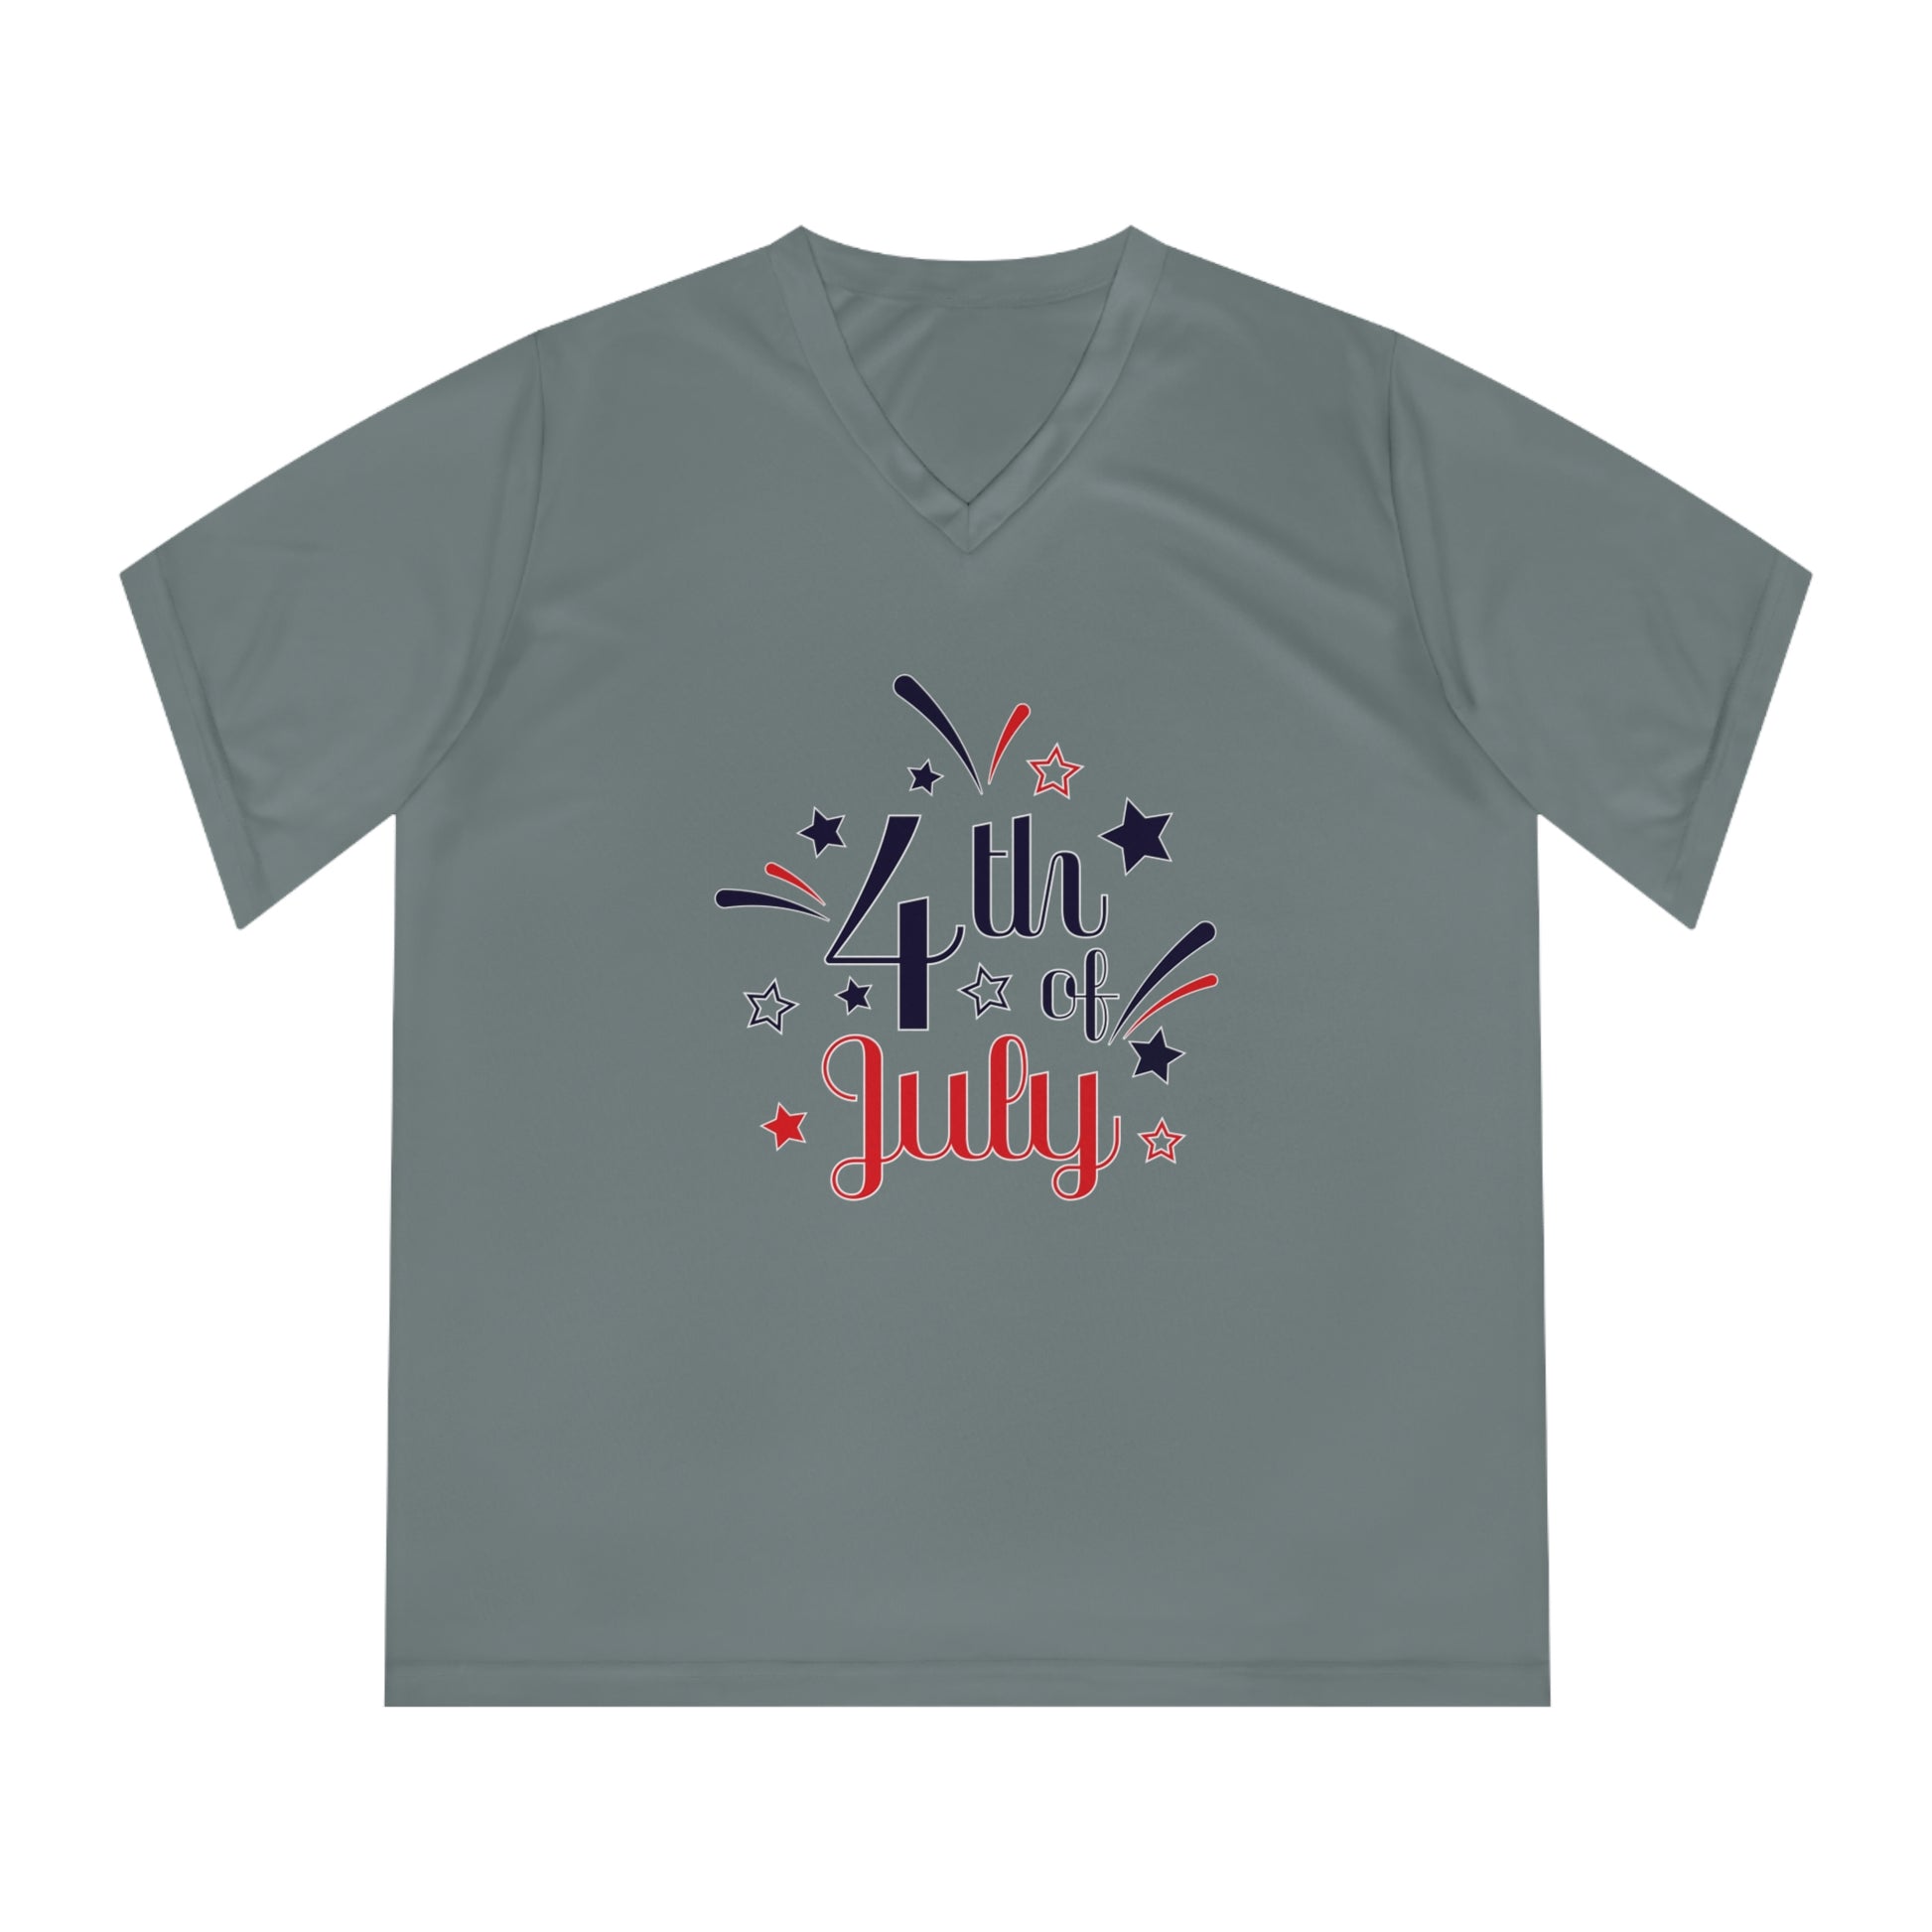 Flat front view of the grey t-shirt